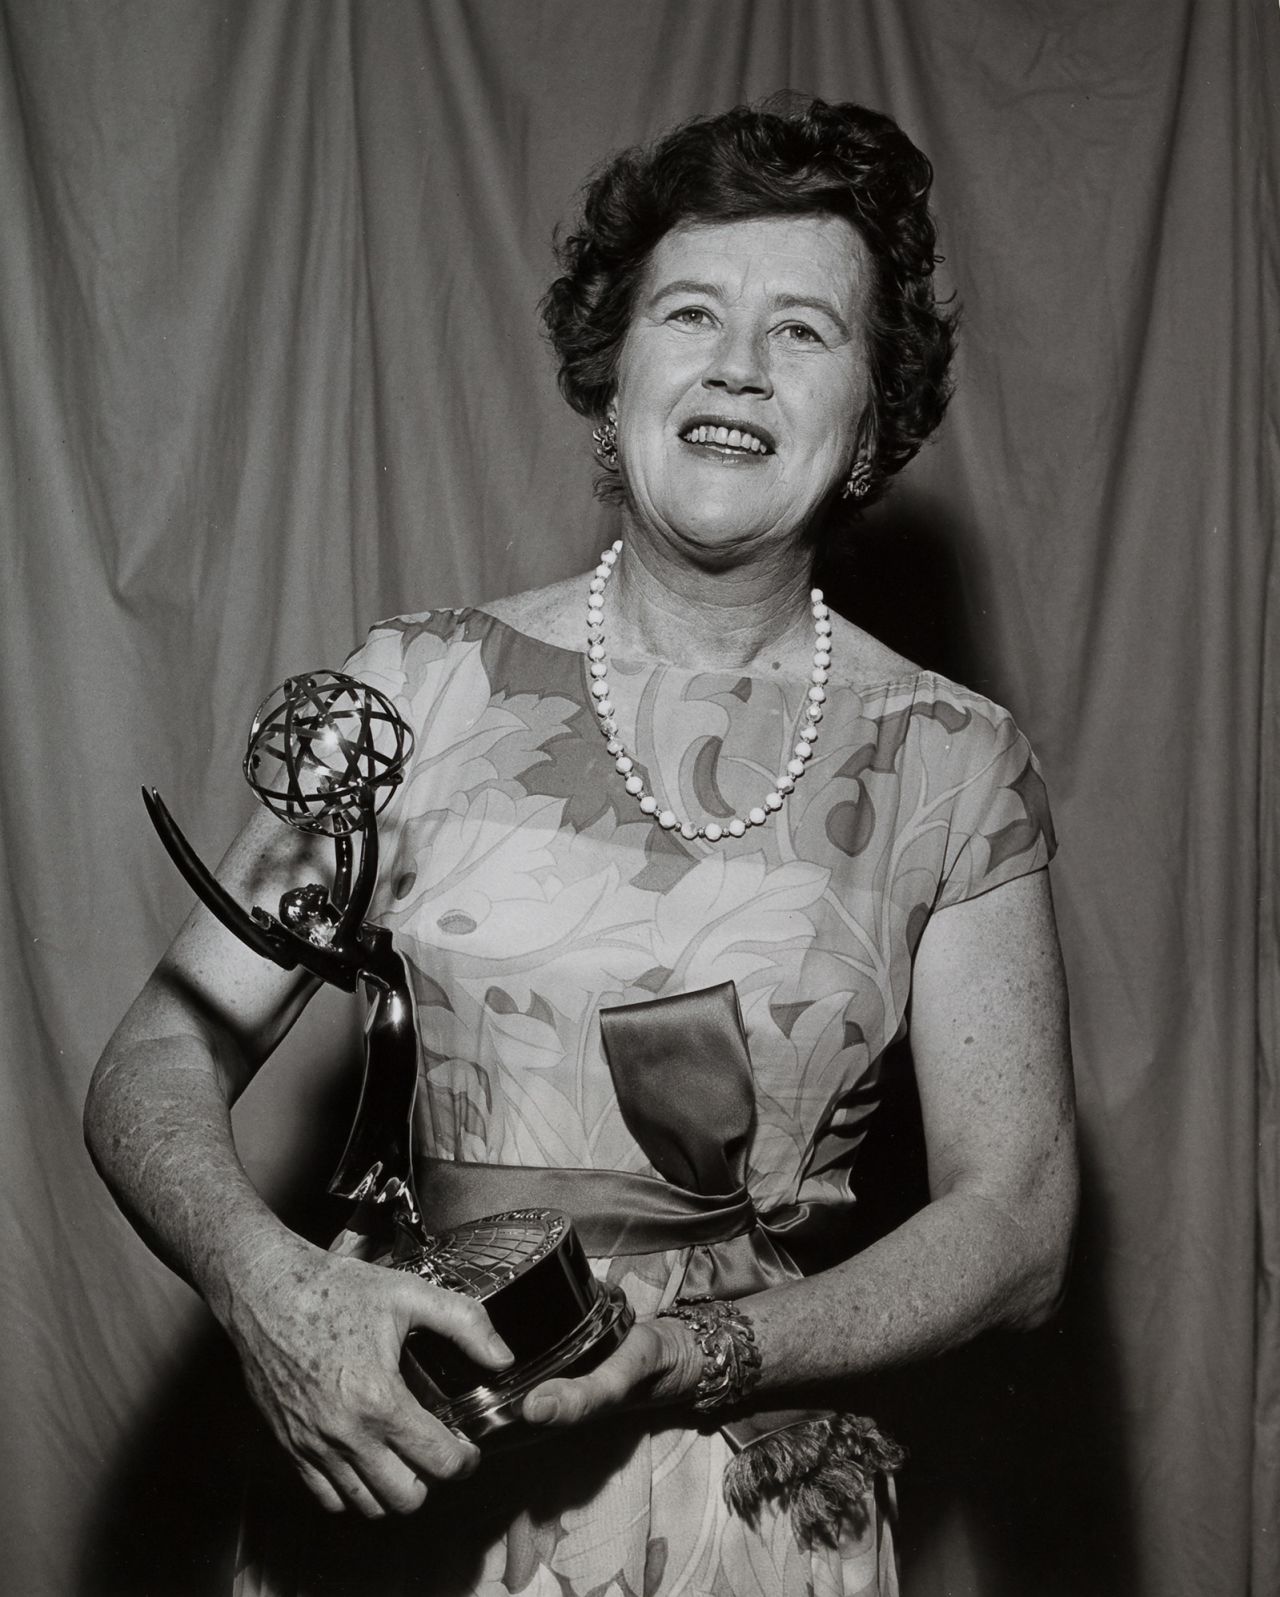 Child poses with an Emmy Award she won for "The French Chef" in 1966. Child was the first educational television personality to win an Emmy Award.